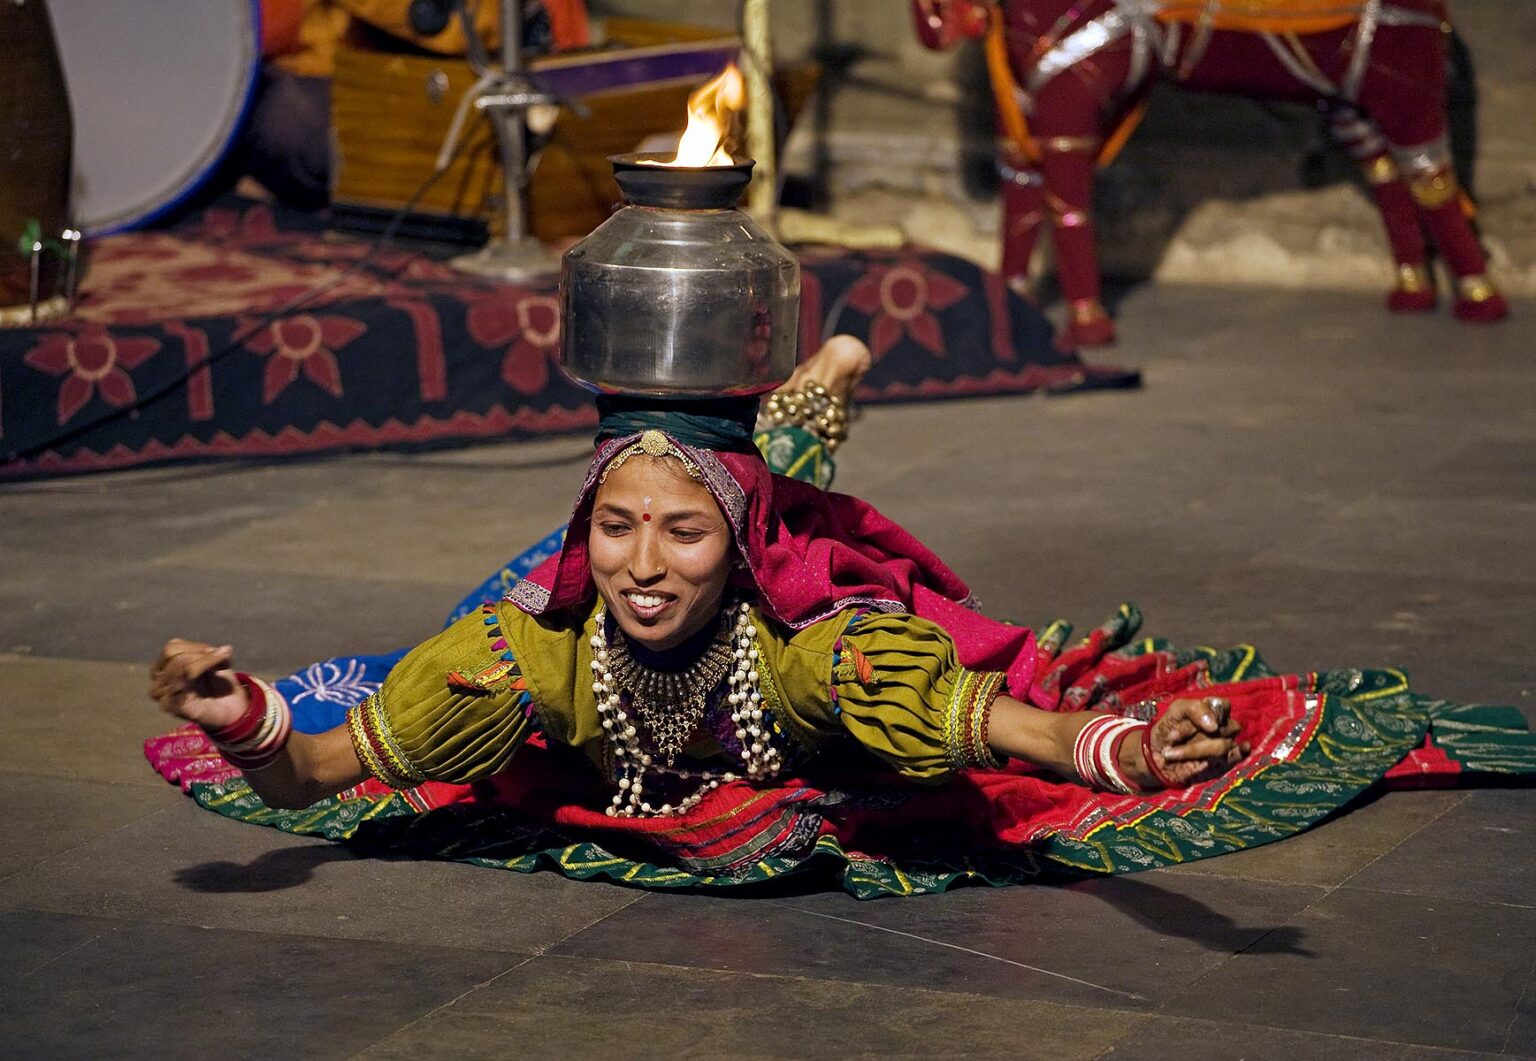 A Rajasthani woman performs a traditional DANCE with a flaming pot on her head at the BAGORE KI HAVELI in UDAIPUR - RAJASTHAN, INDIA